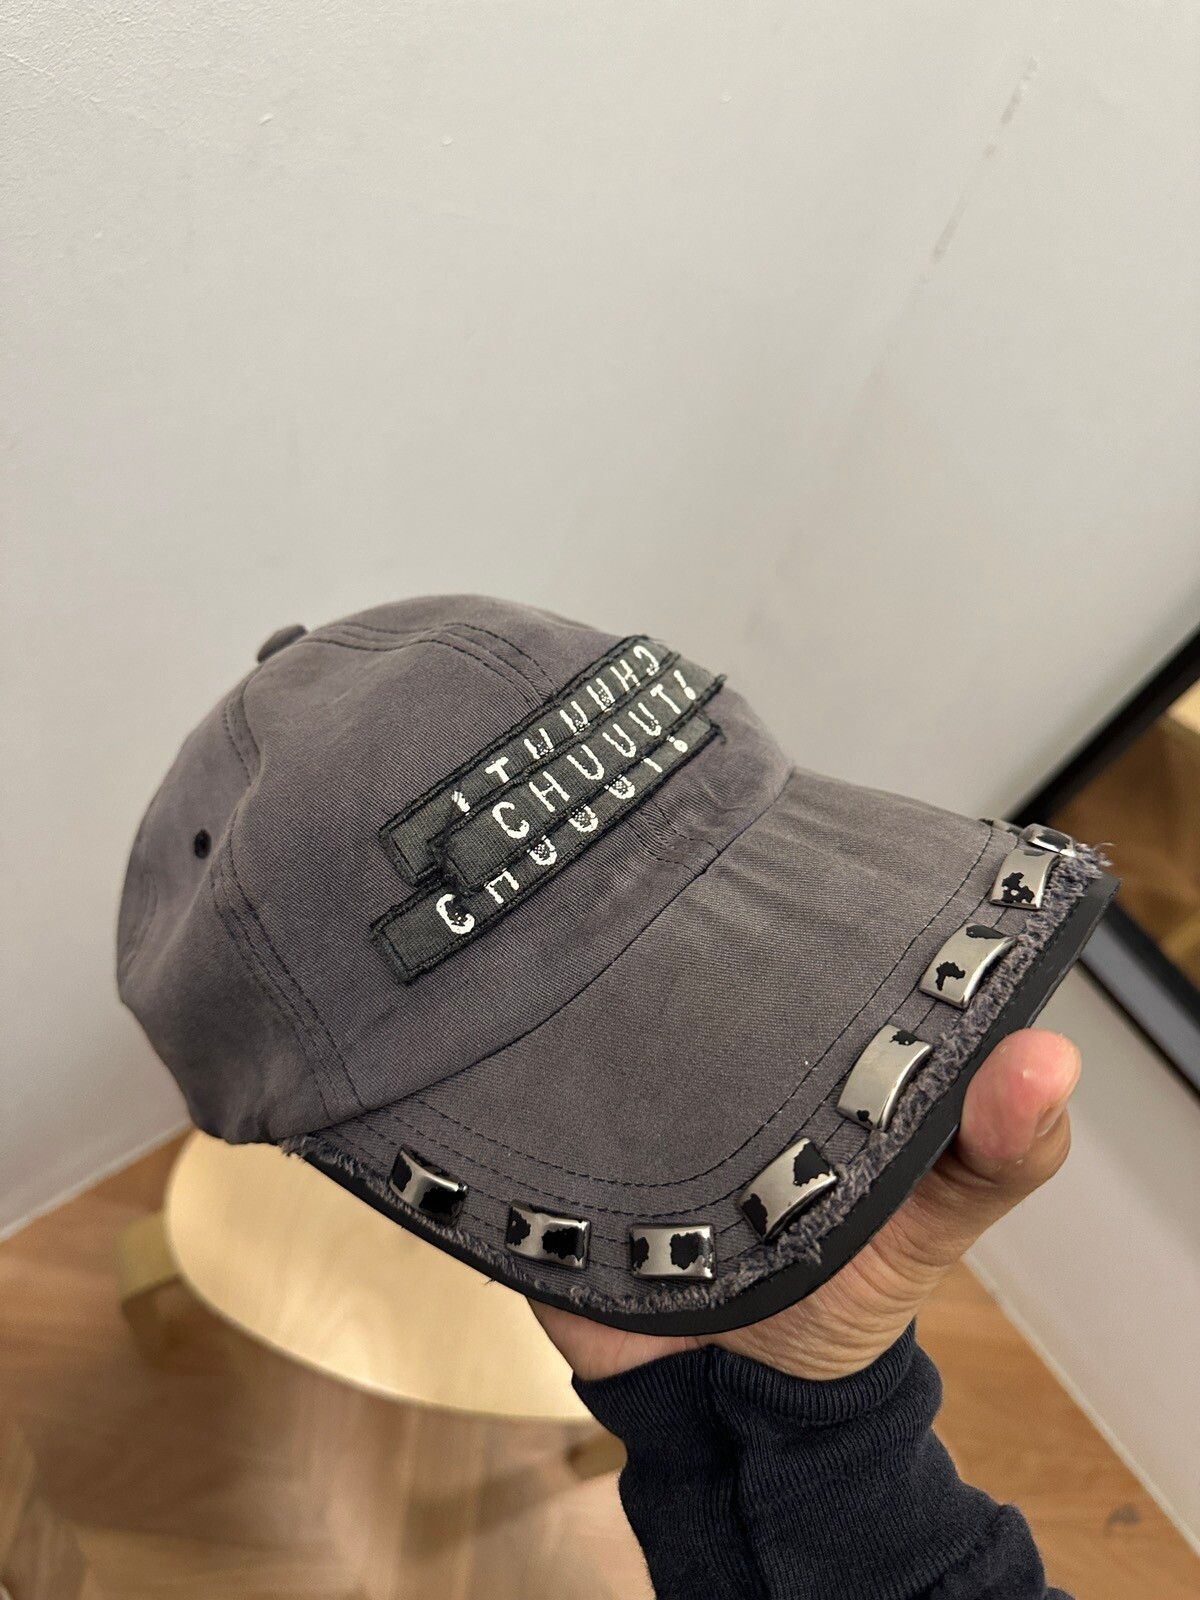 Undercover Undercover SS06 “T” Chuuut Hat | Grailed